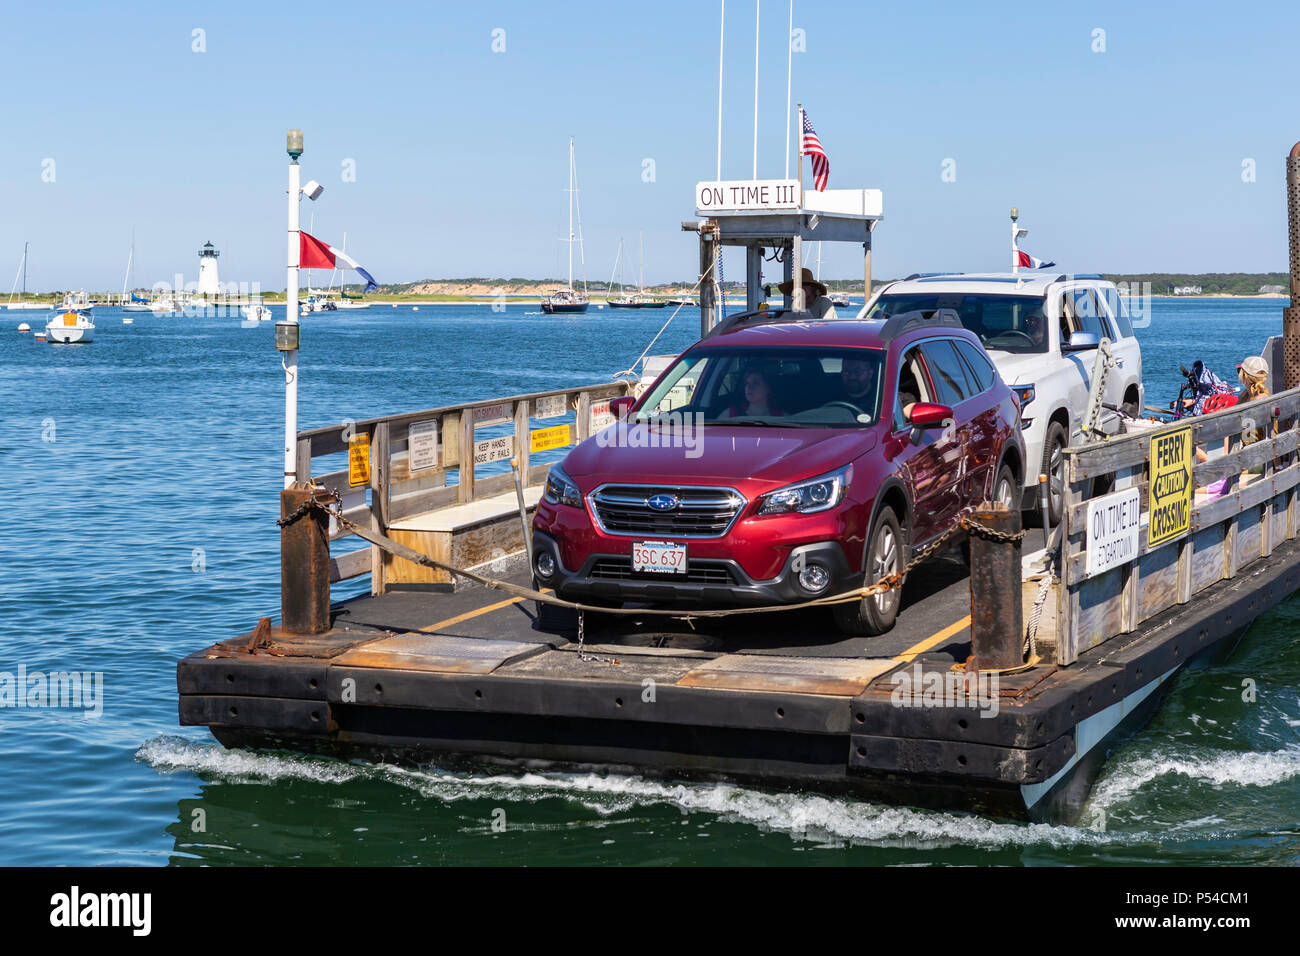 Chappy Ferry 'On Time III' arrives with cars and passengers from Chappaquiddick Island in Edgartown, Massachusetts on Martha's Vineyard. Stock Photo